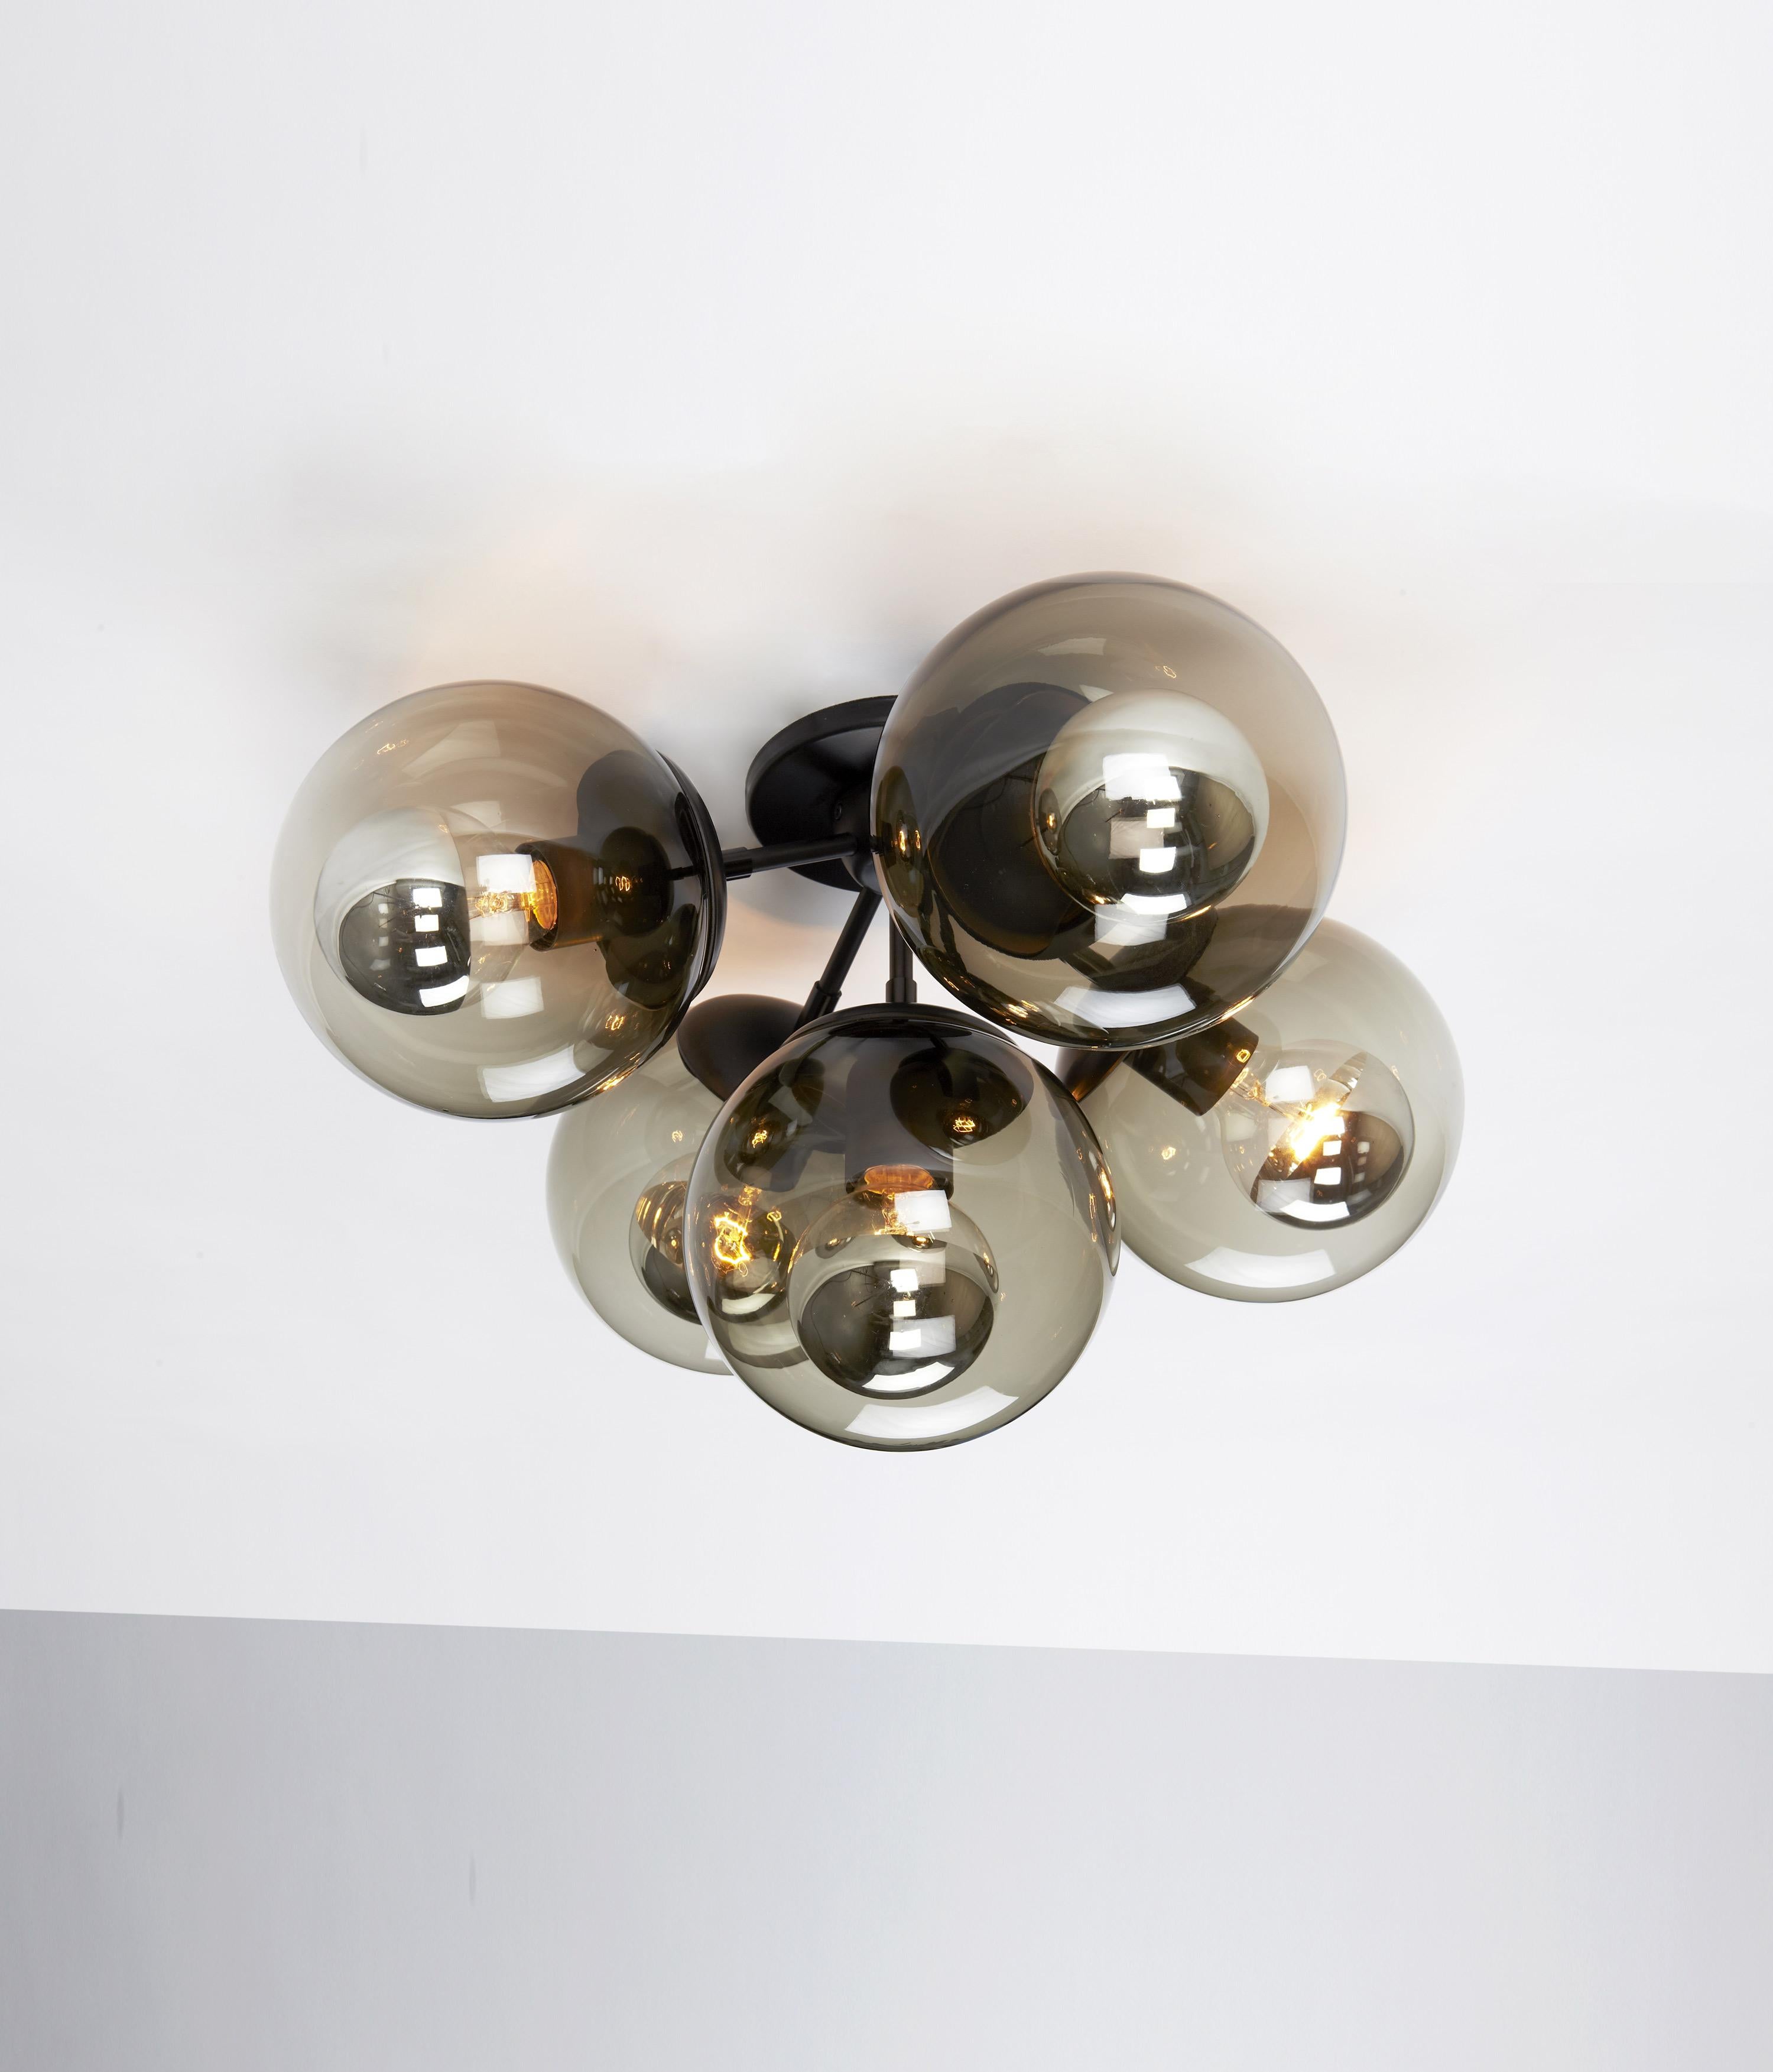 The Modo series was inspired by the kinds of ready-made, off-the-shelf parts that can be found at inexpensive lighting stores. Unlike those, however, Modo is painstakingly engineered and custom CNC-milled from solid aluminum. The spoke-and-hub